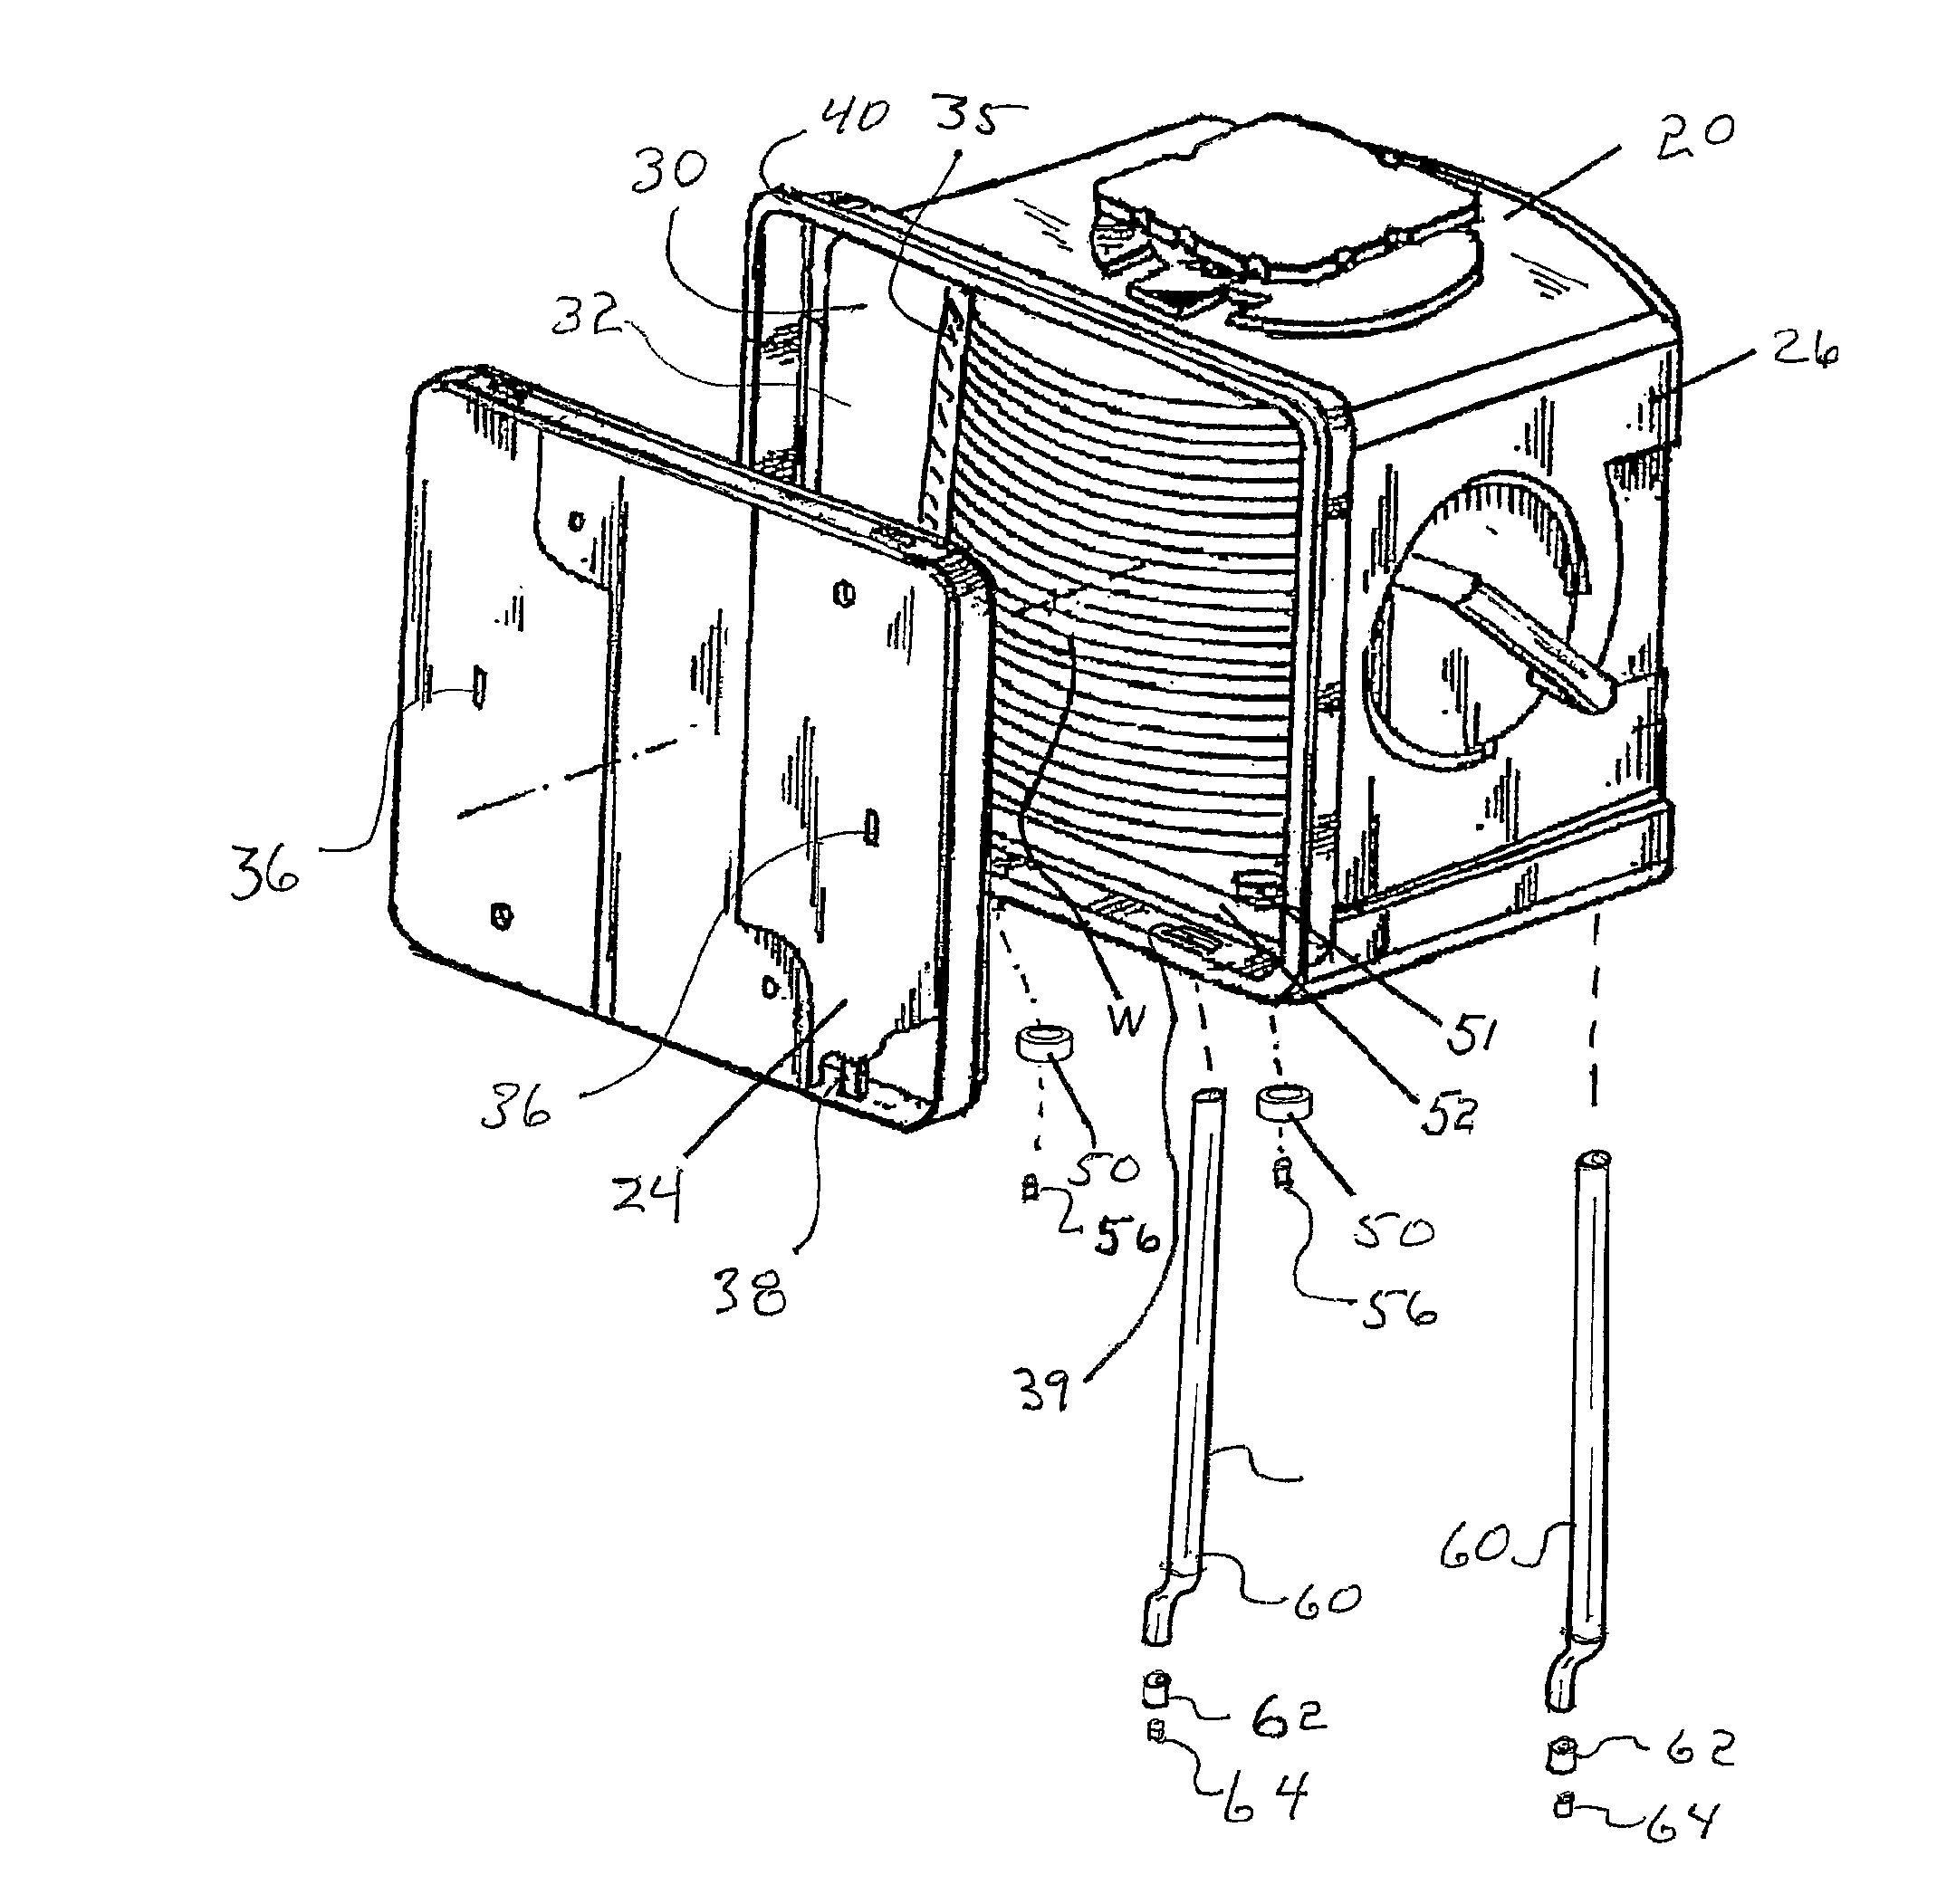 Wafer container with tubular environmental control components